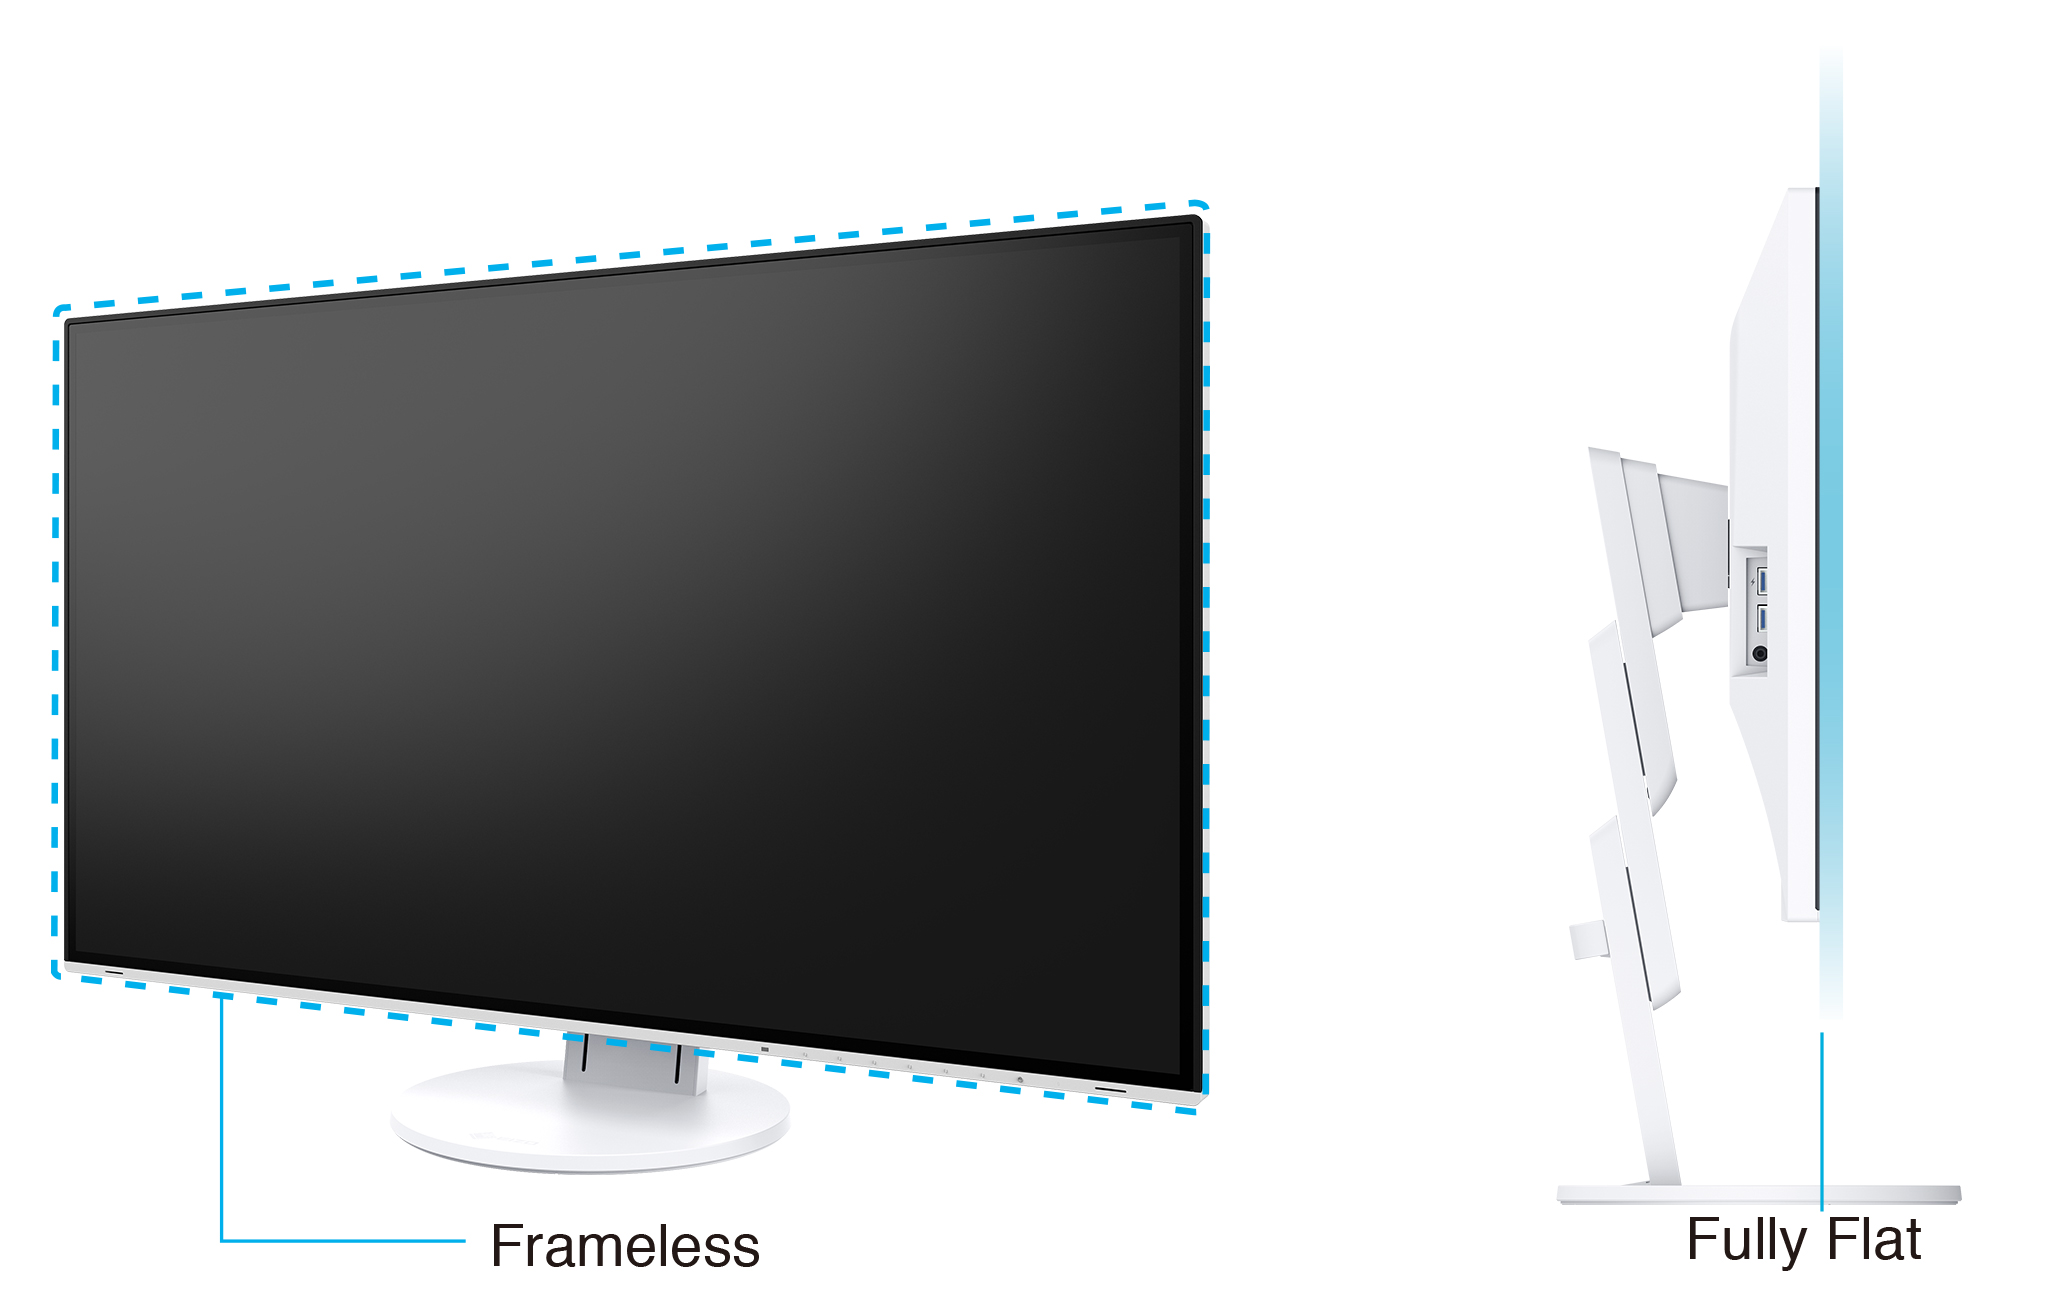 Fit 4K Resolution on Any Desk with this Fully Flat and Frameless Design